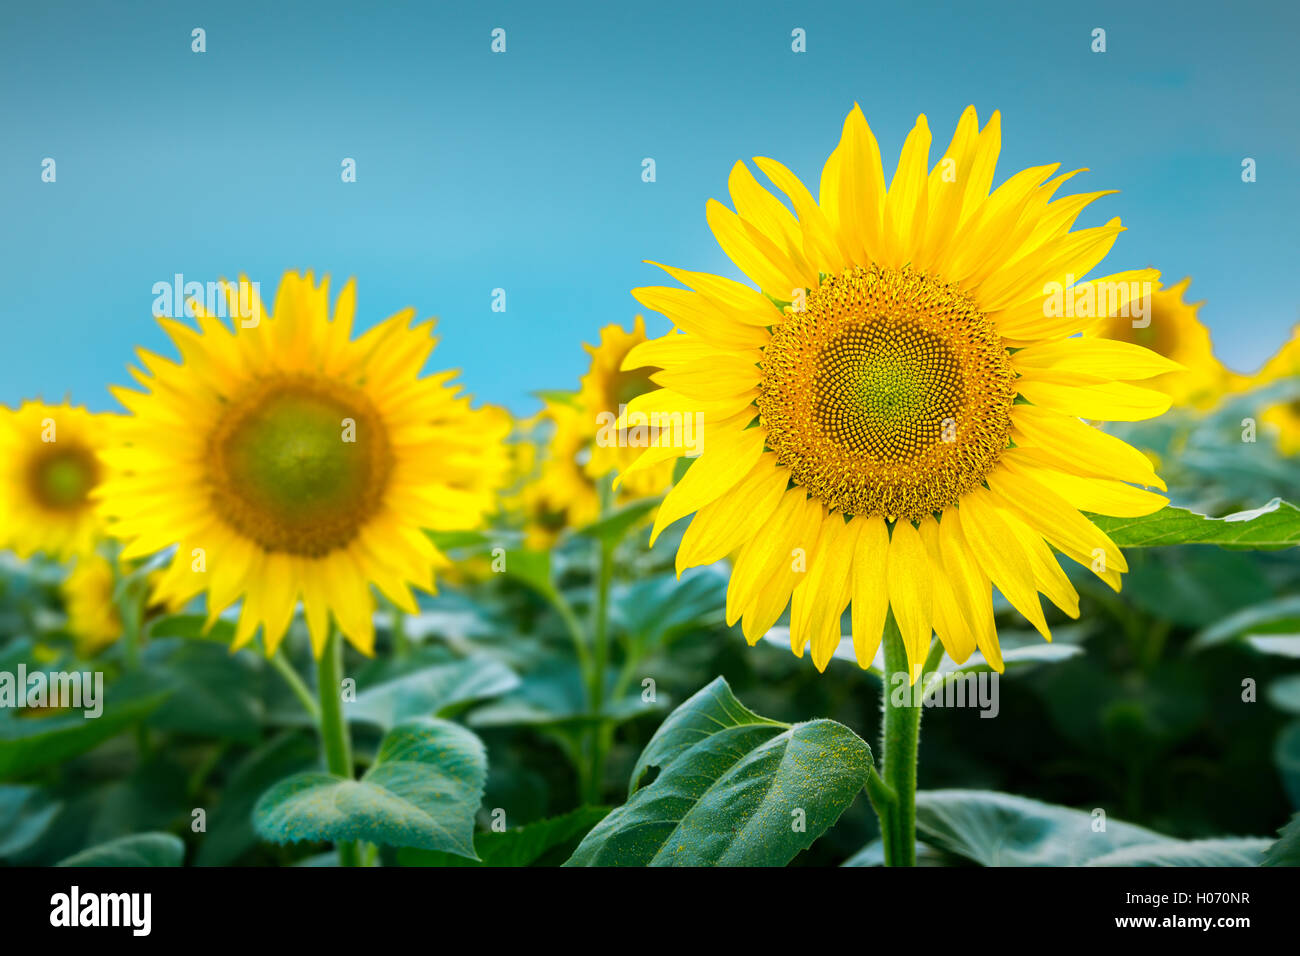 Large sunflower in focus against blue sky Stock Photo